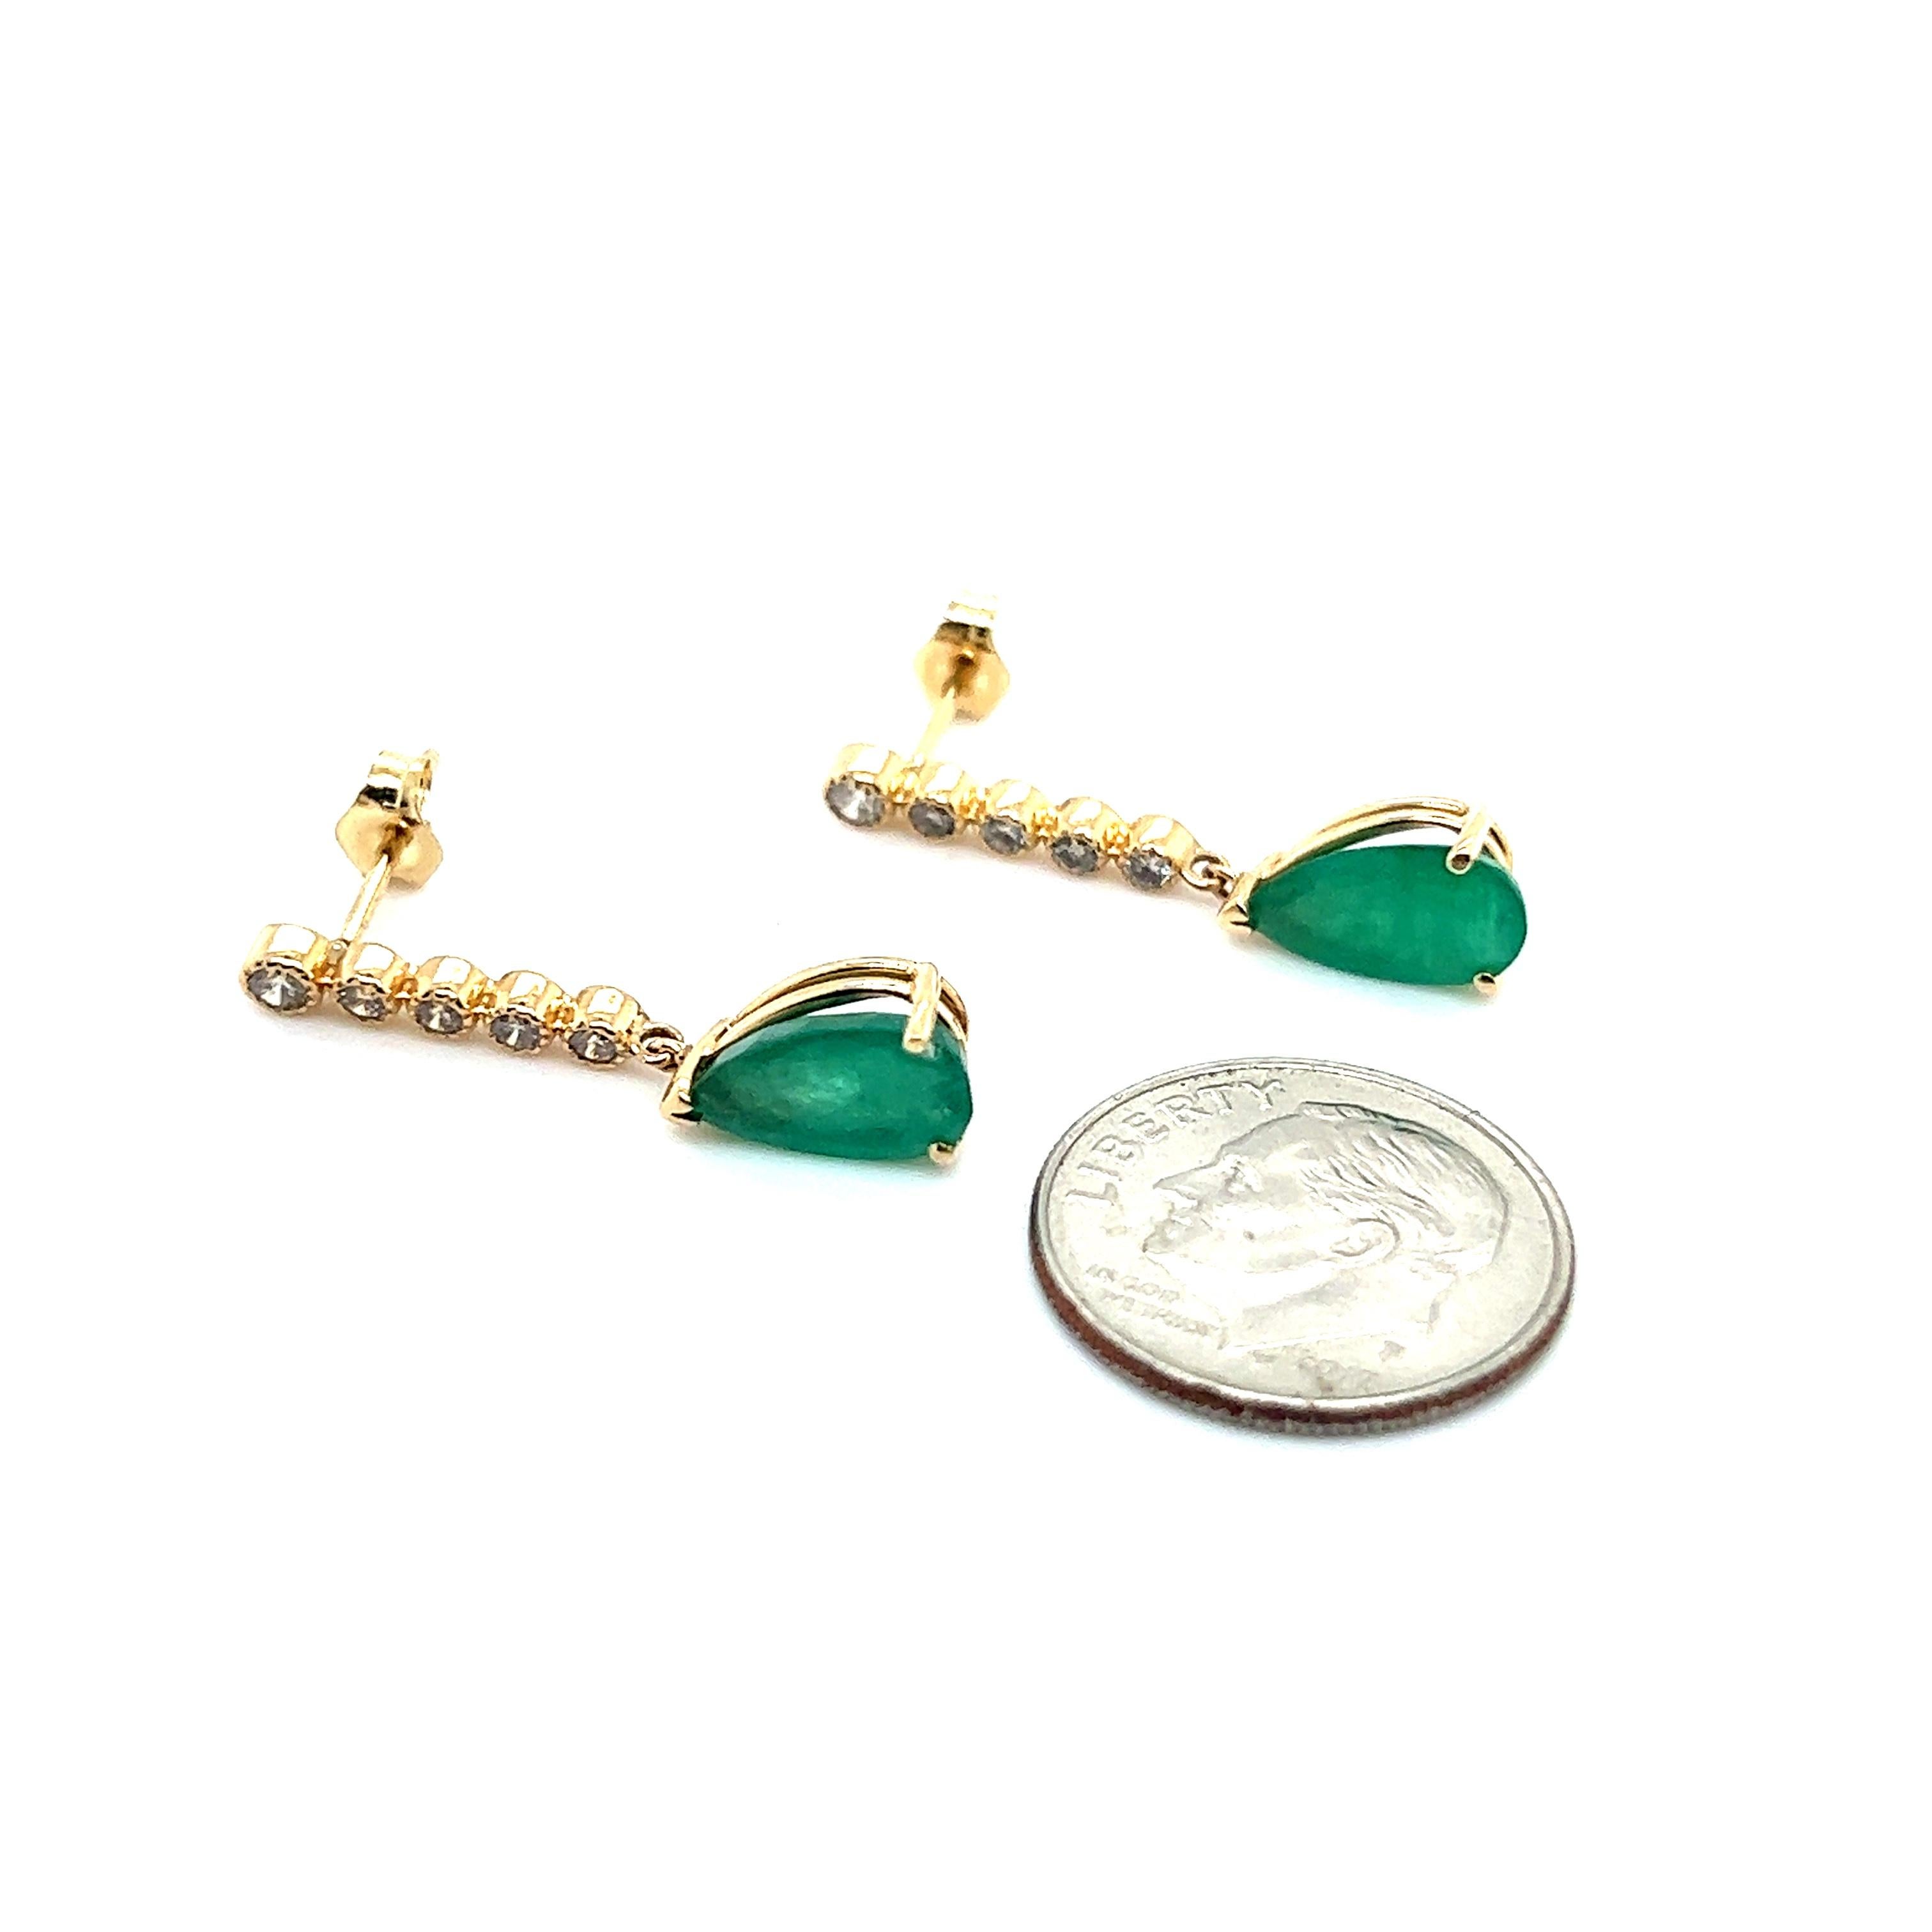 Natural Finely Faceted Quality Emerald Diamond Dangle Earrings 14k Y Gold 2.23 TCW Certified $3,975 121256

Please look at the video attached for this item. With the video you can see the movement of the item and appreciate the faceting and details